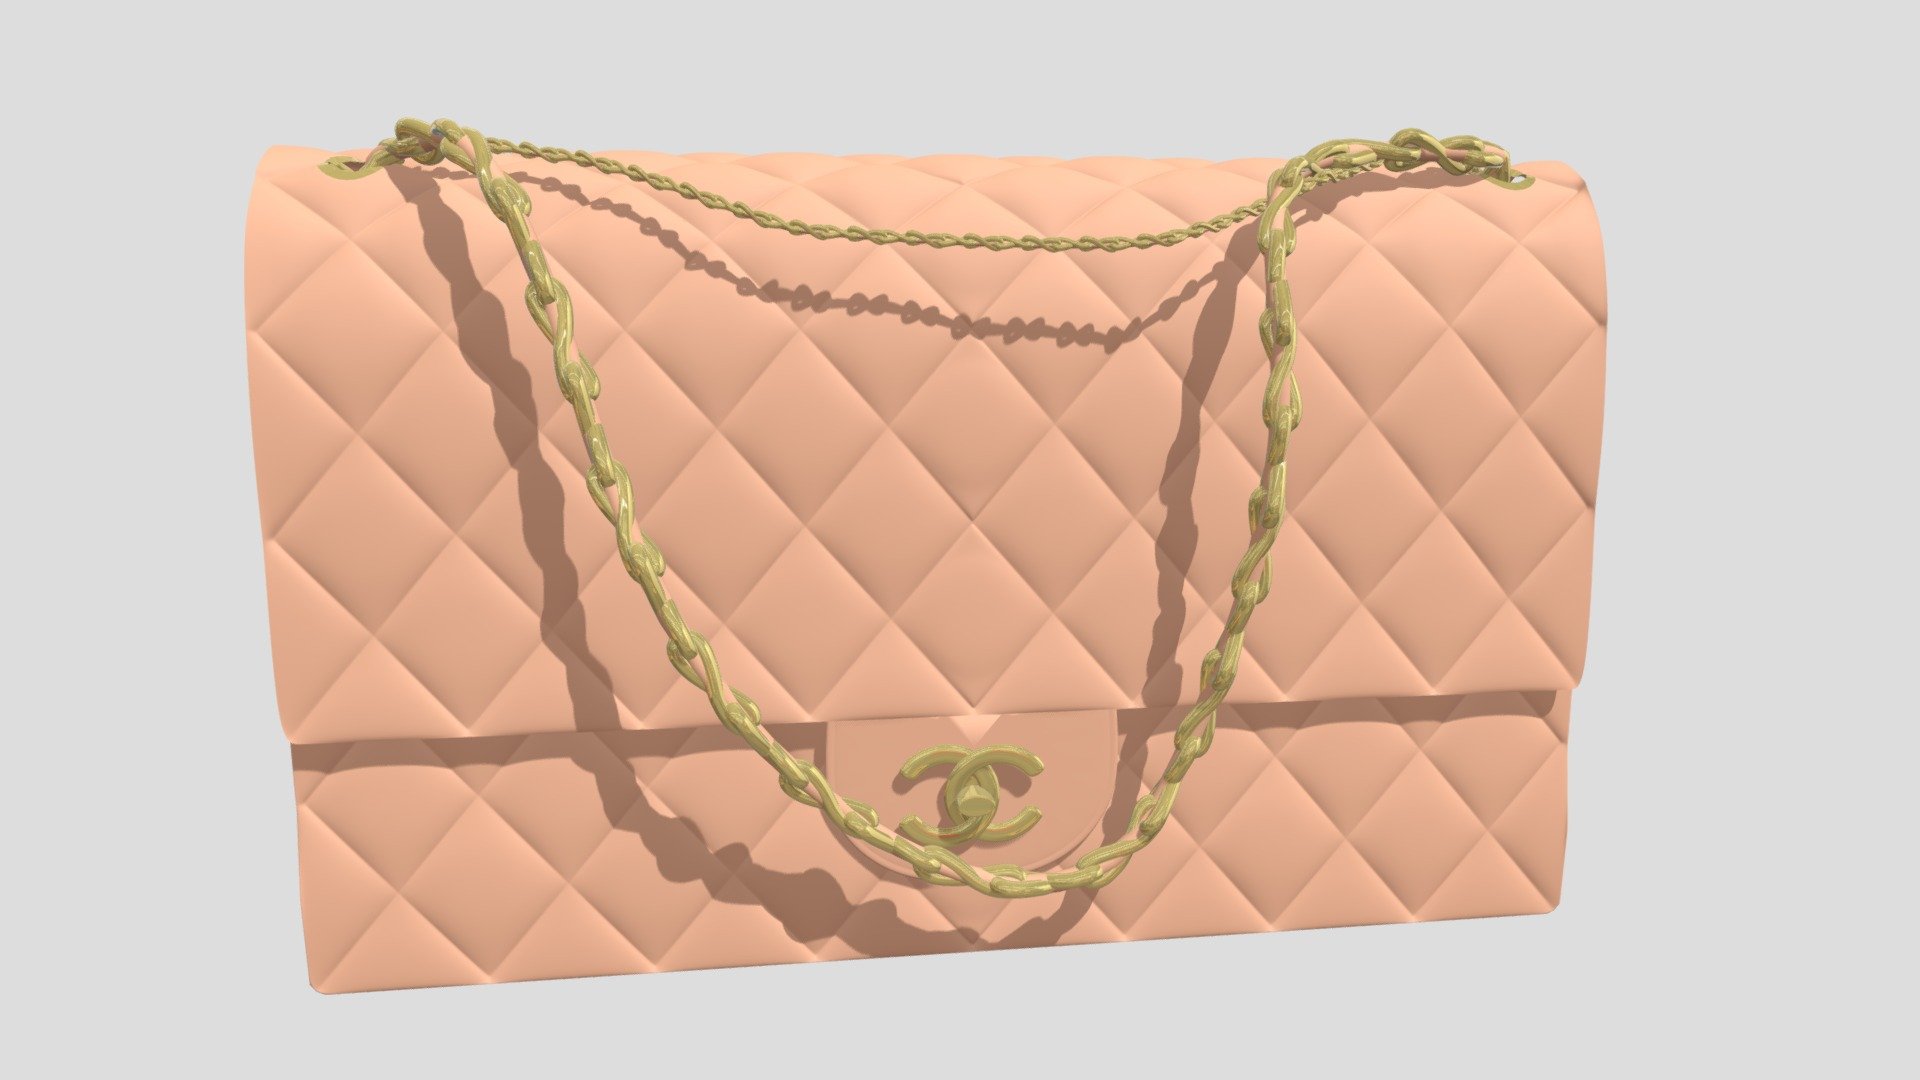 3D model Chanel Large Hobo Bag PBR Realistic VR / AR / low-poly